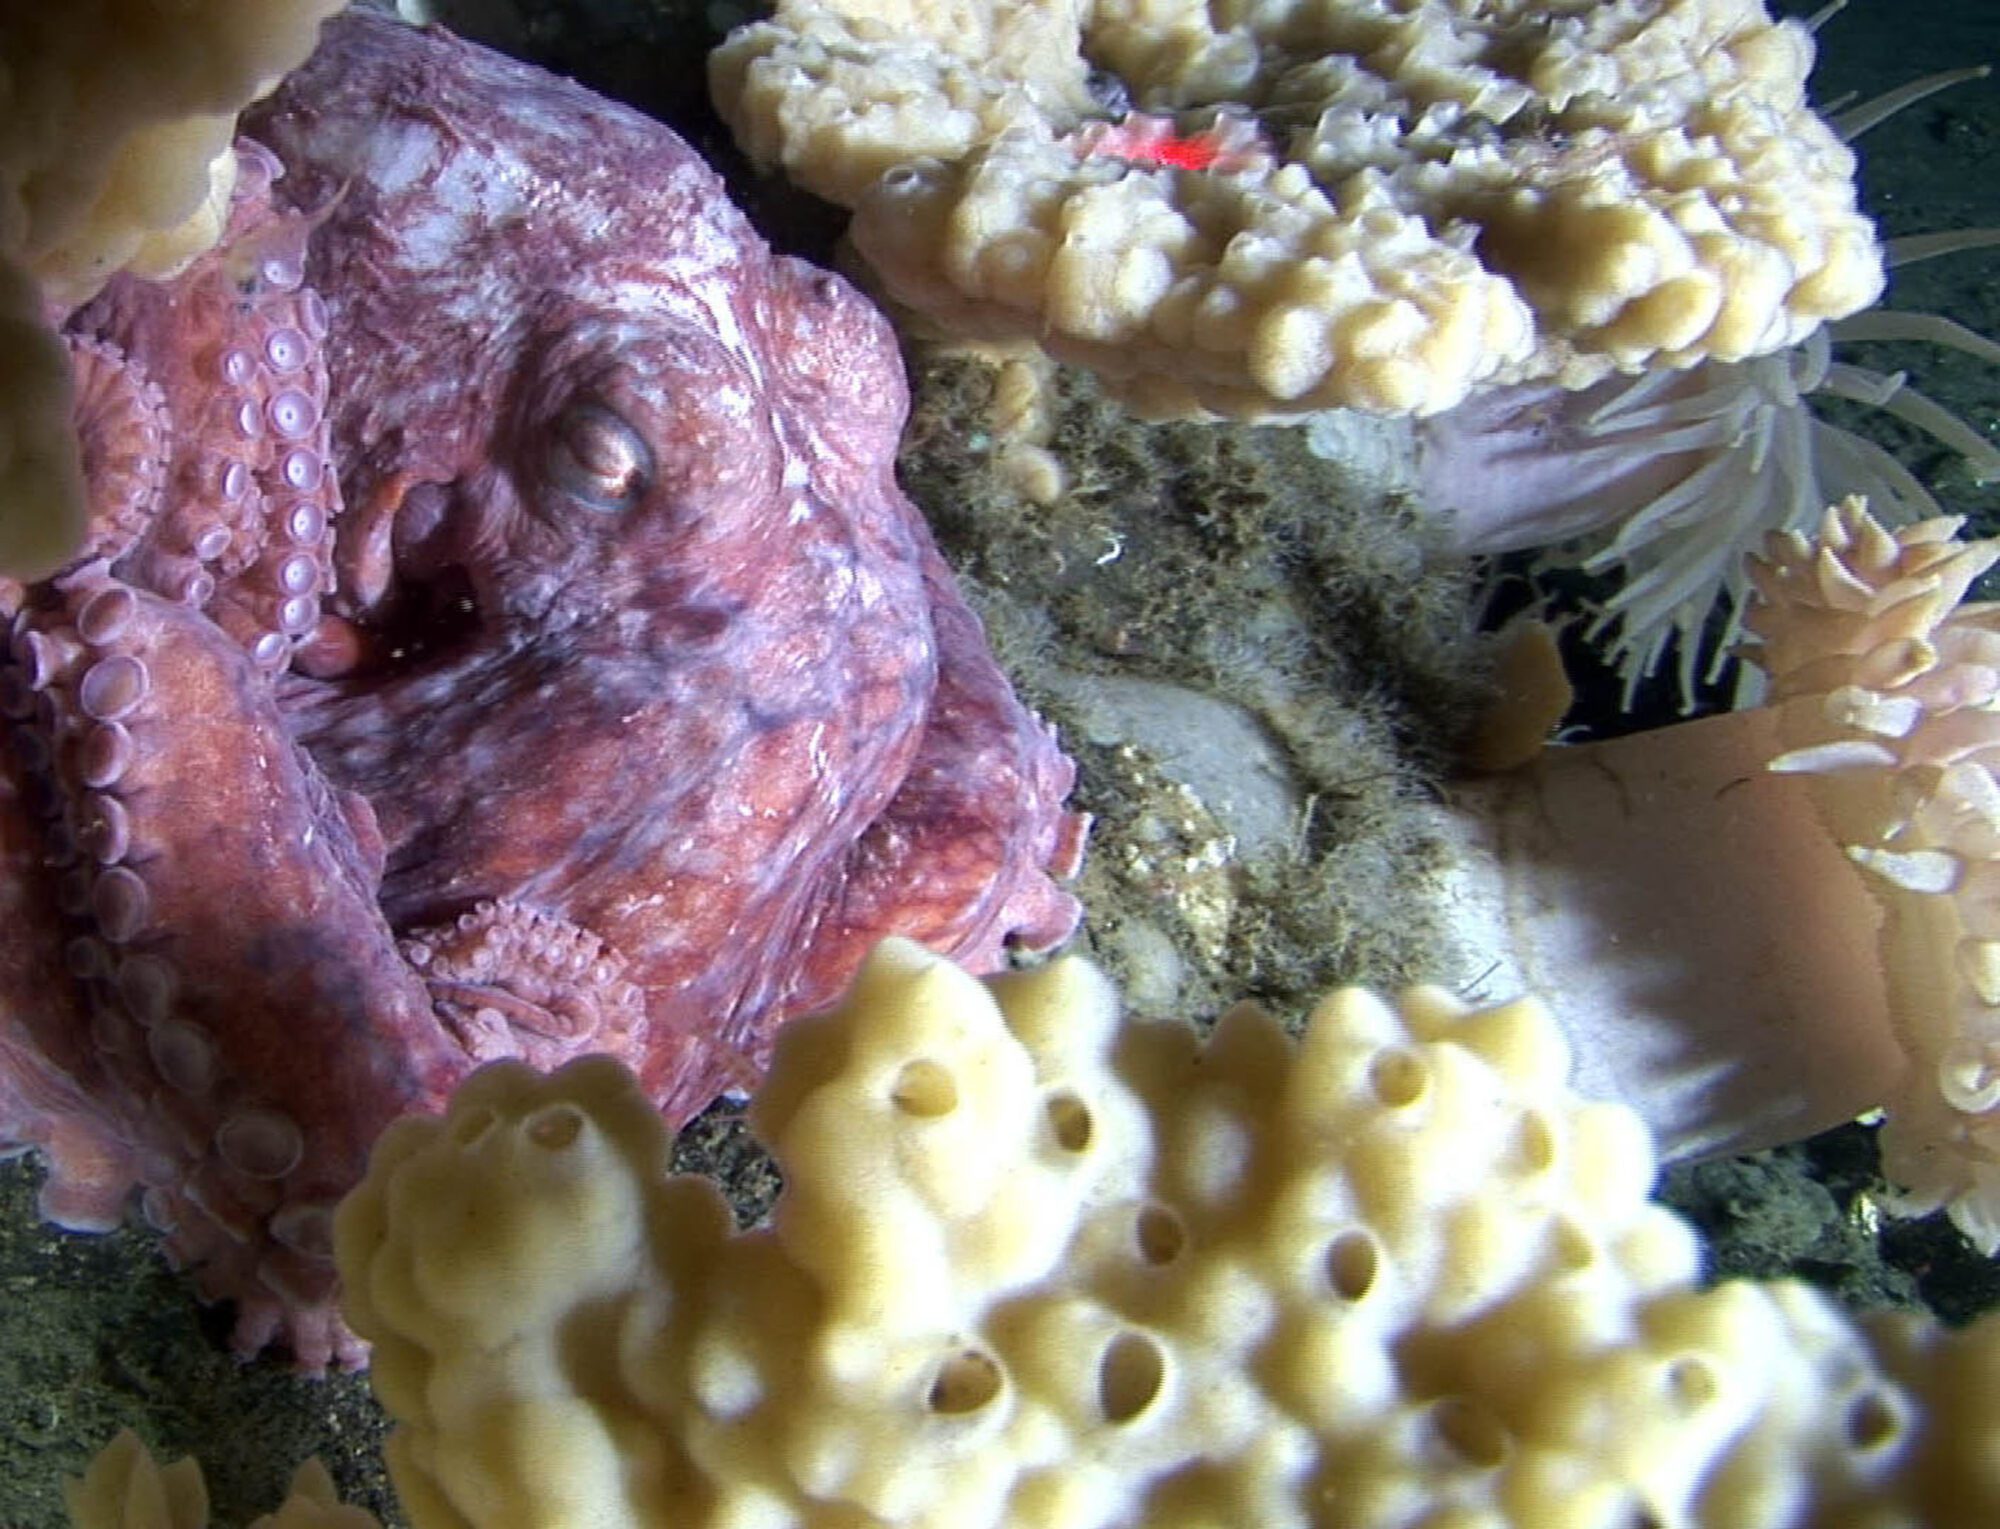 A pinky-purple octopus with its eyes closed and legs curled up around its head, nestled among pale yellow corals and rocks and other jelly-like spiked creatures.